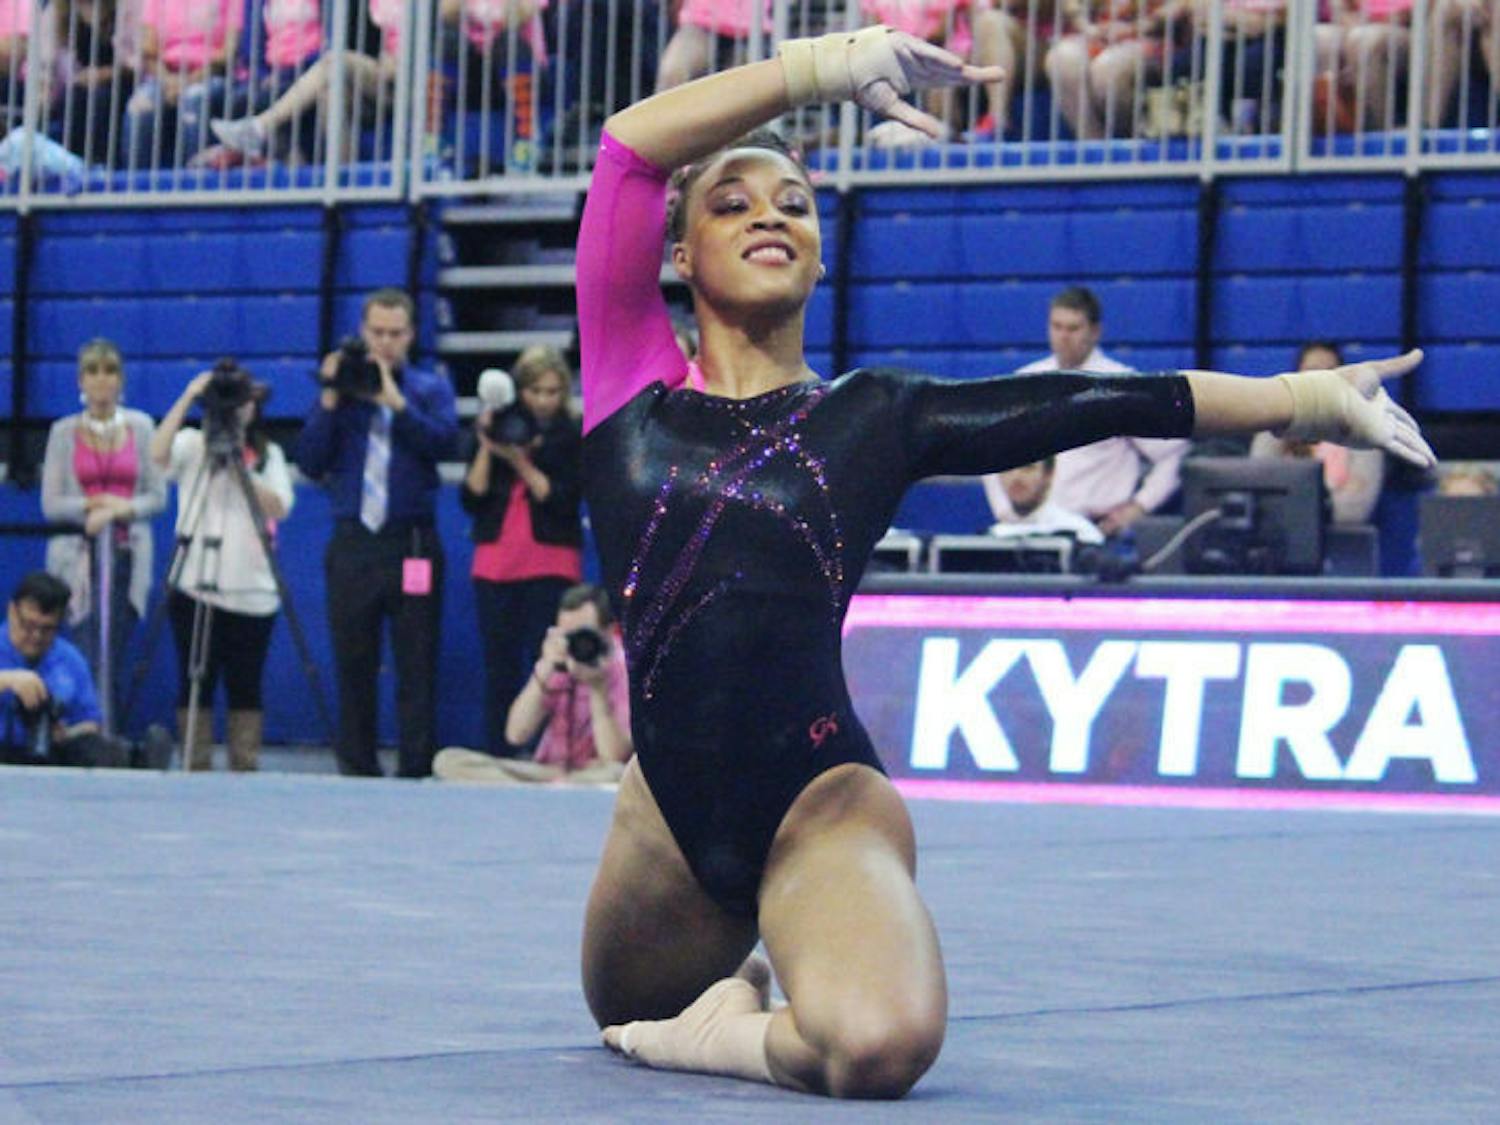 Kytra Hunter performs a floor routine during Florida’s 198.125-197.625 win against LSU on Feb. 21 in the O’Connell Center. Hunter landed six perfect scores (four on floor and two on vault) during the 2014 season.